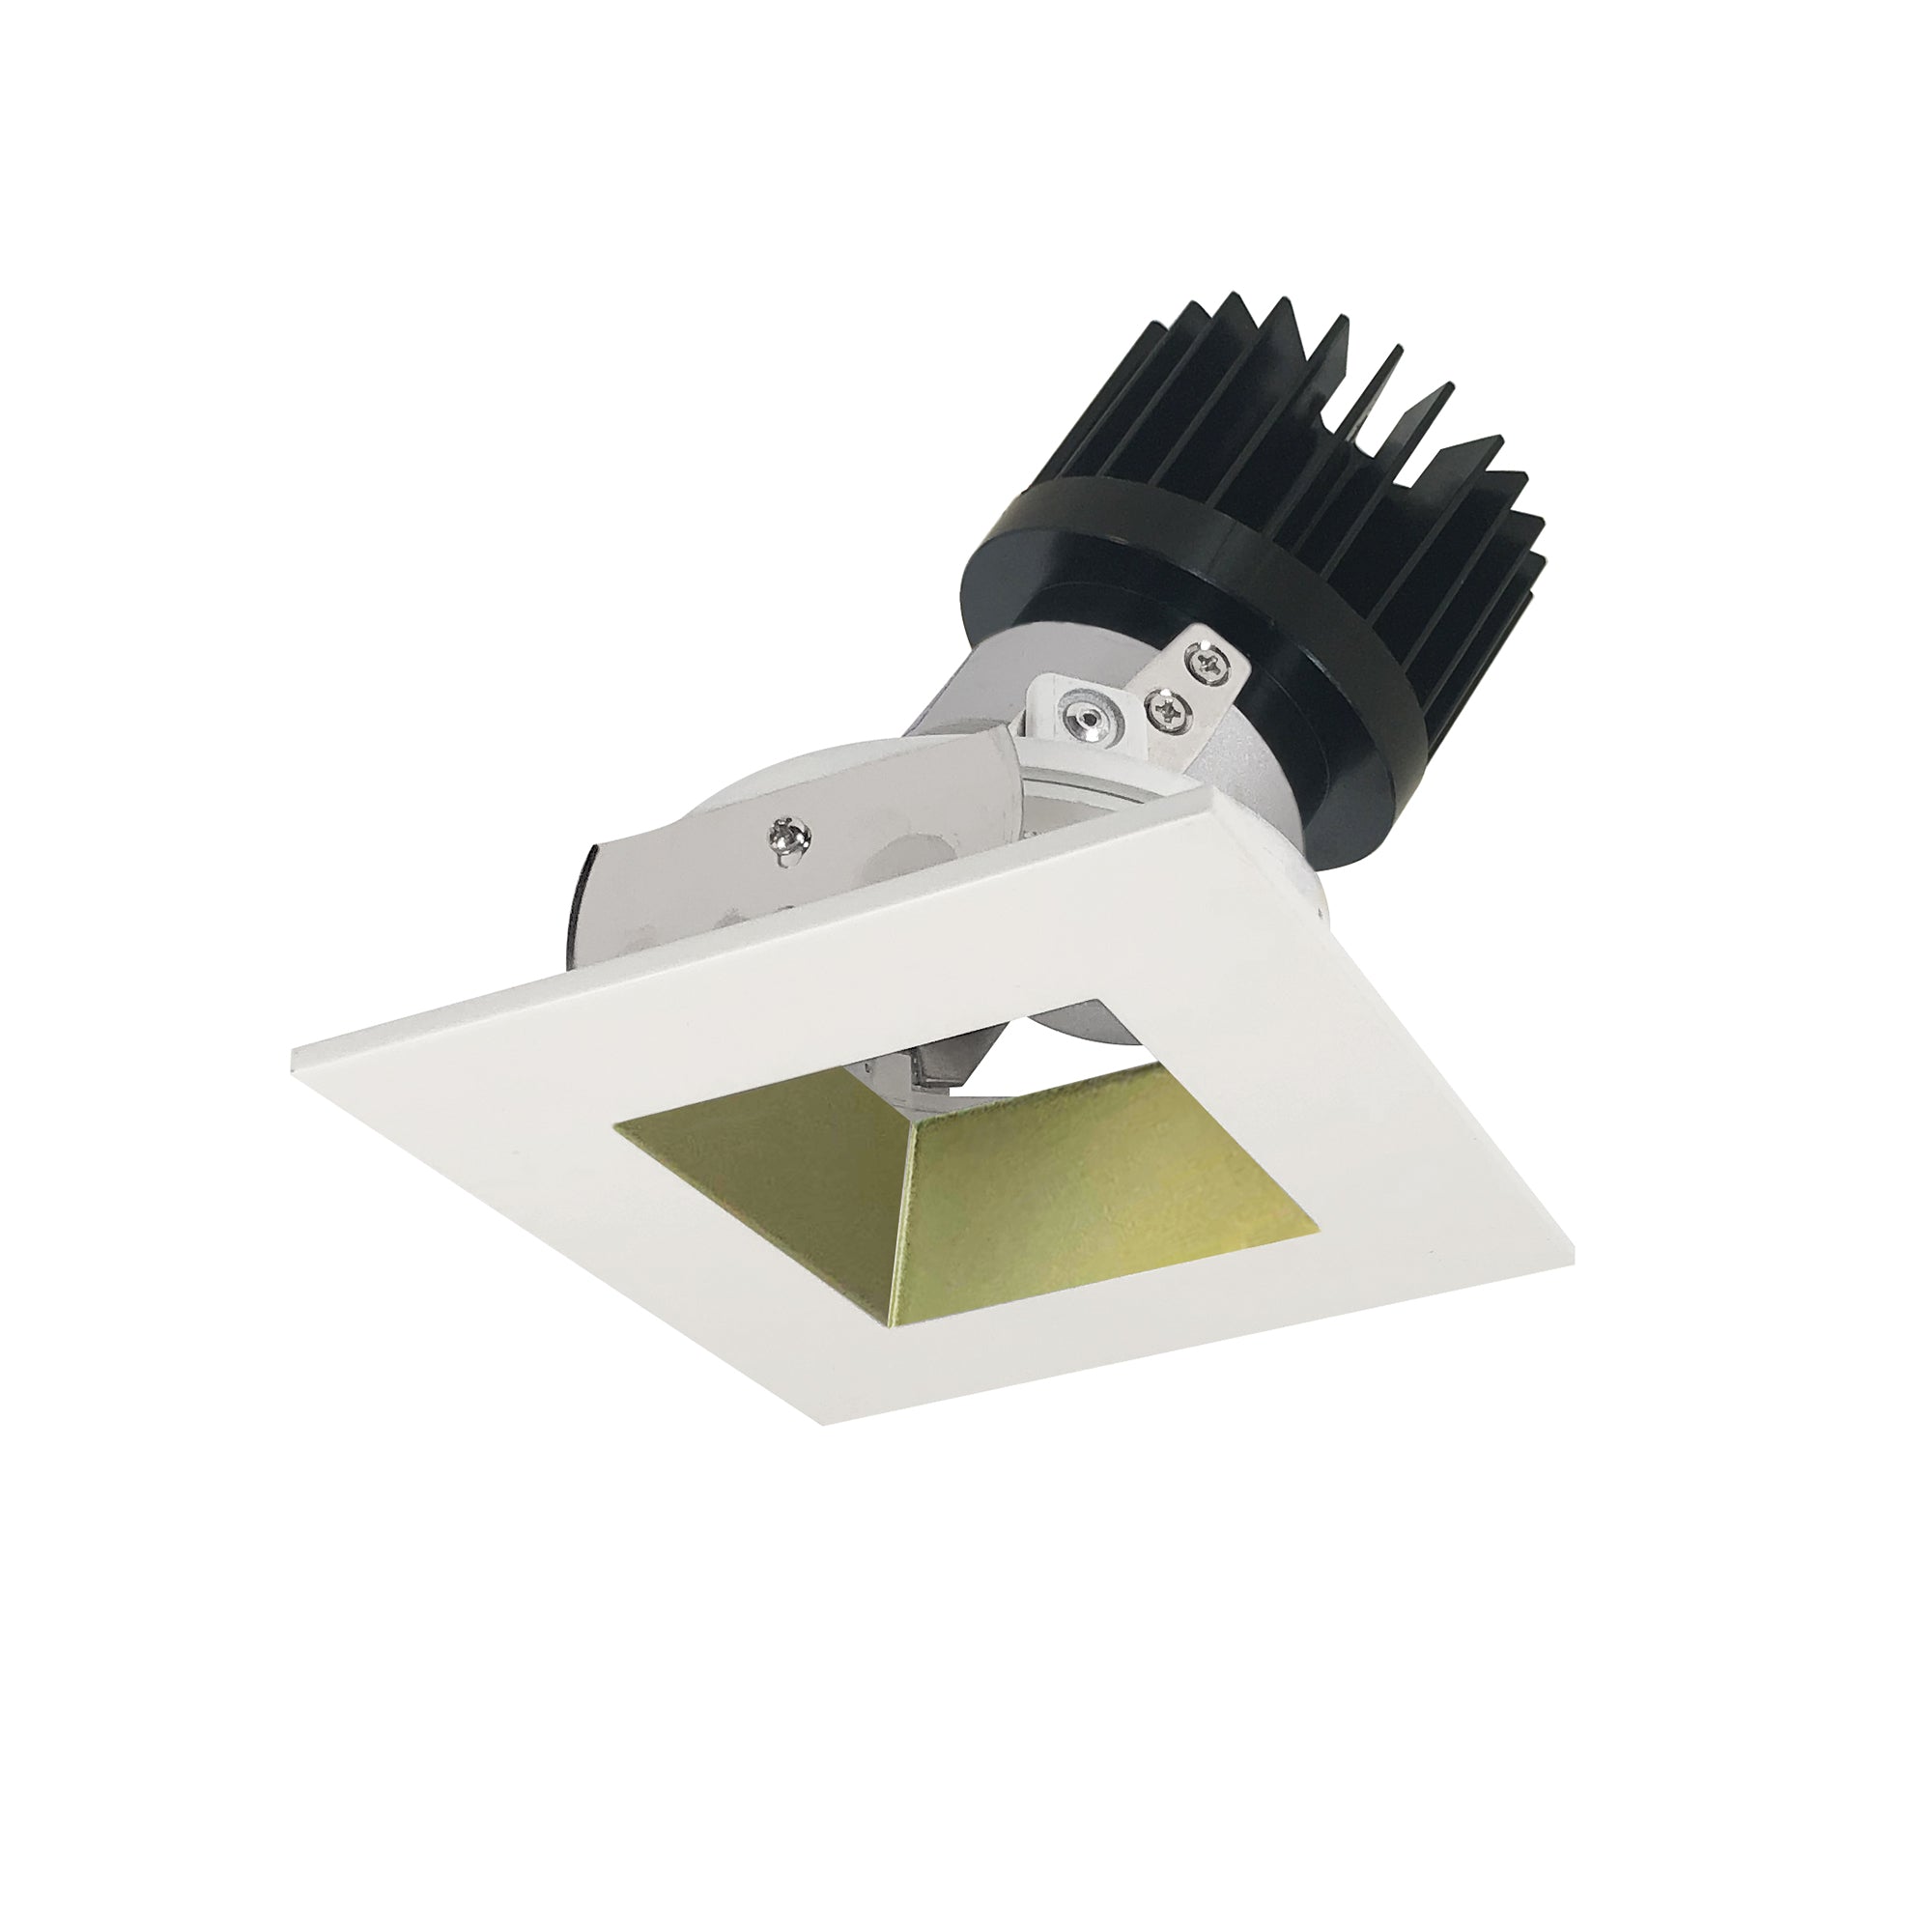 Nora Lighting NIO-4SDSQ40XCHMPW/HL 4" Iolite LED Square Adjustable Reflector With Square Aperture, 1500lm/2000lm (varies by housing), 4000K - Champagne Haze Reflector / Matte Powder White Flange